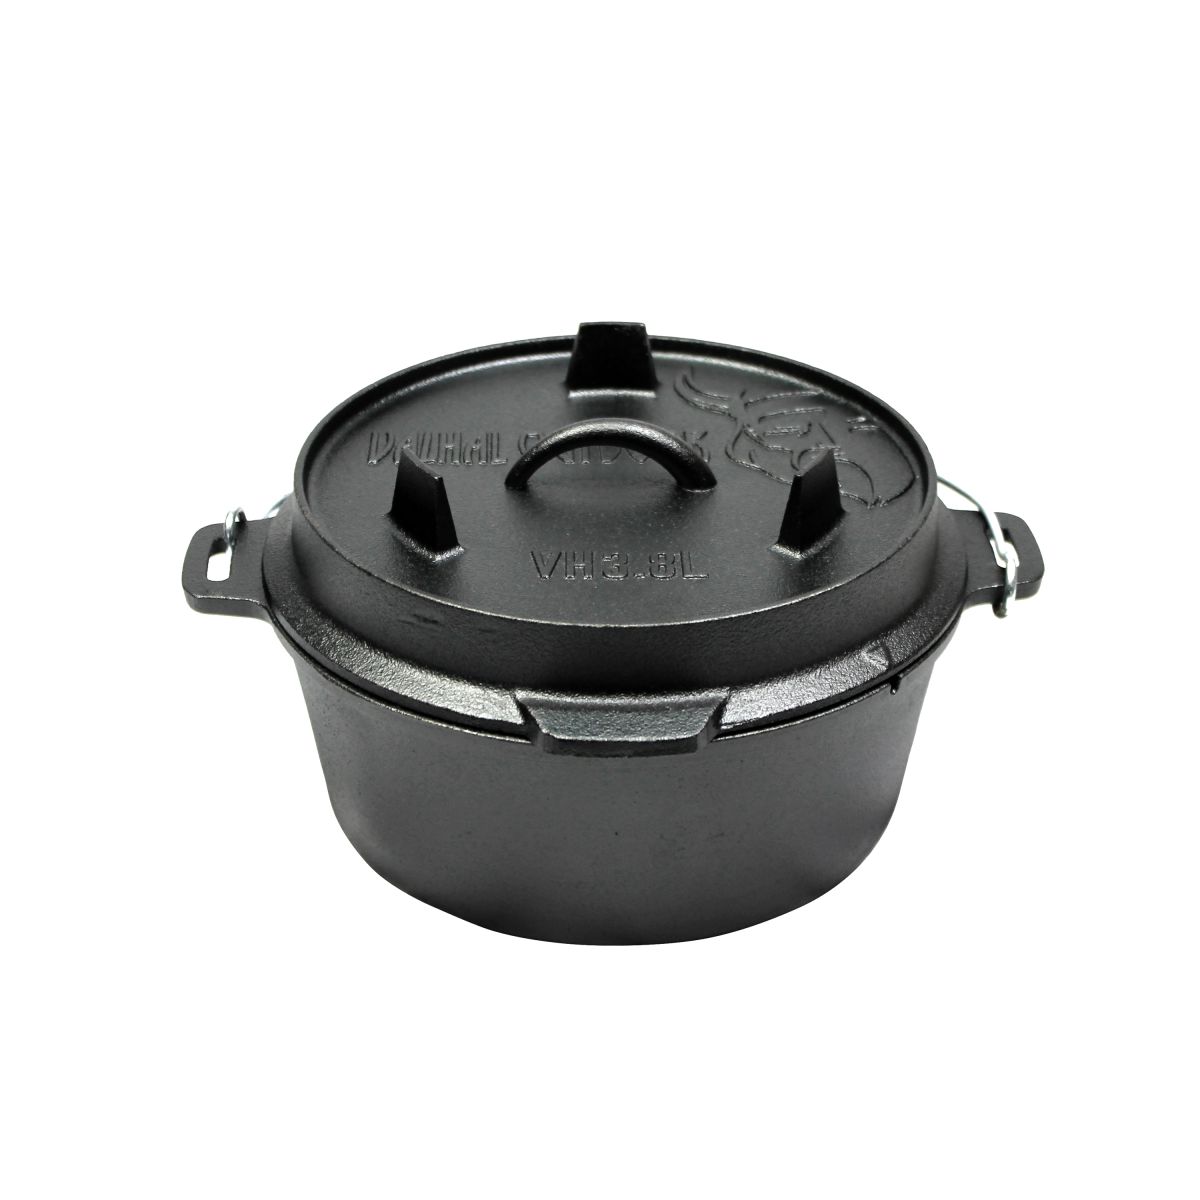 vh38l dutch oven 38l without feet